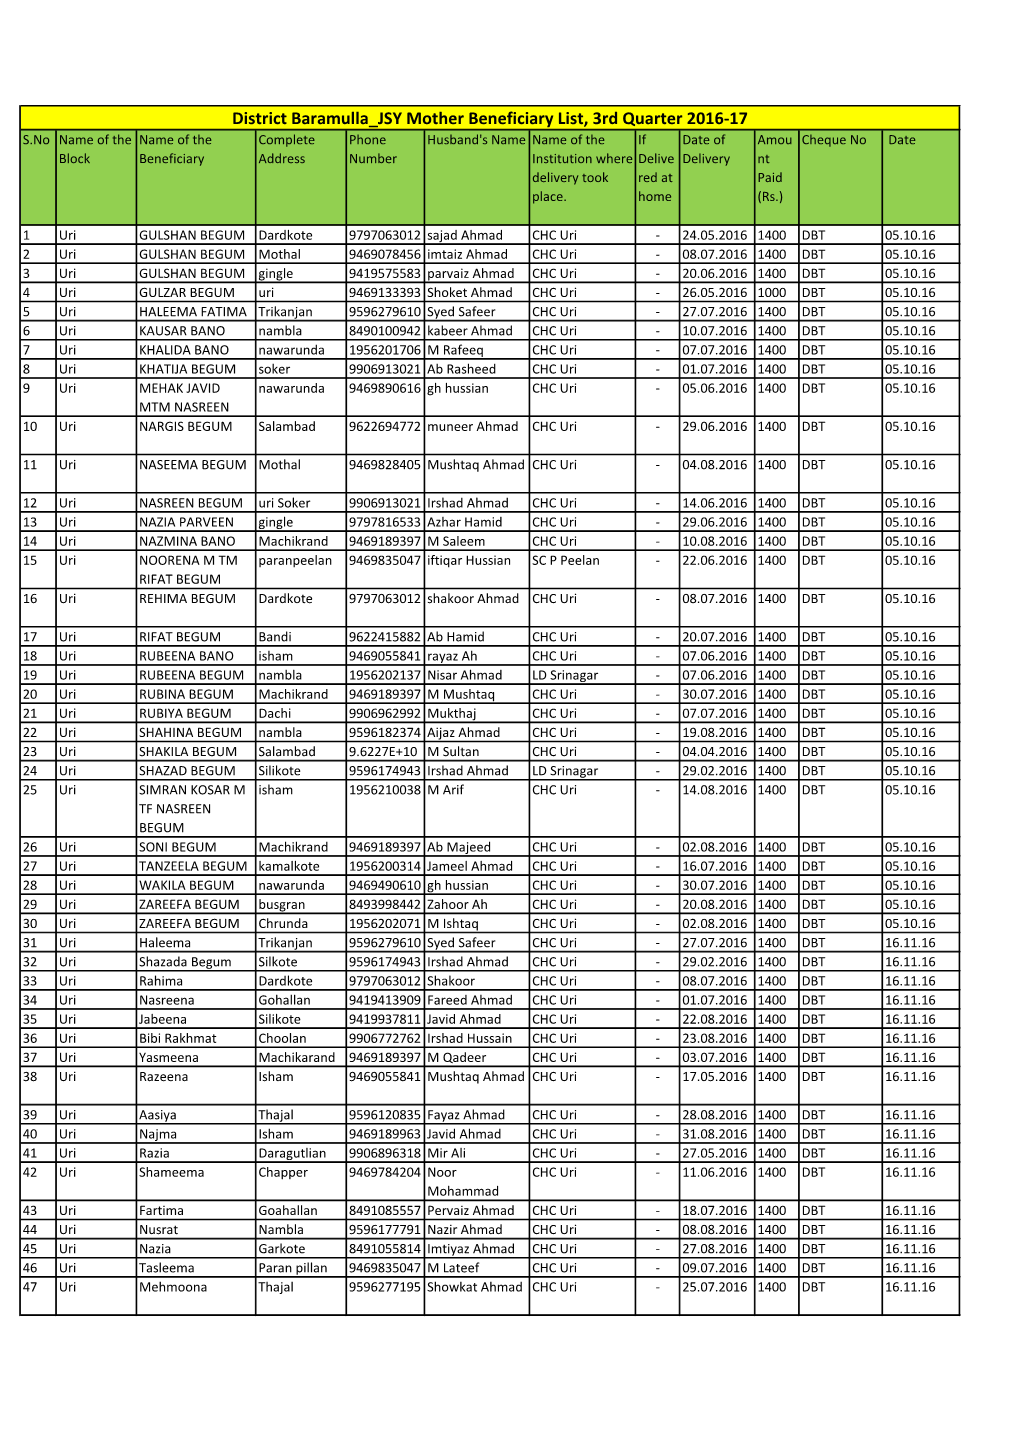 District Baramulla JSY Mother Beneficiary List, 3Rd Quarter 2016-17